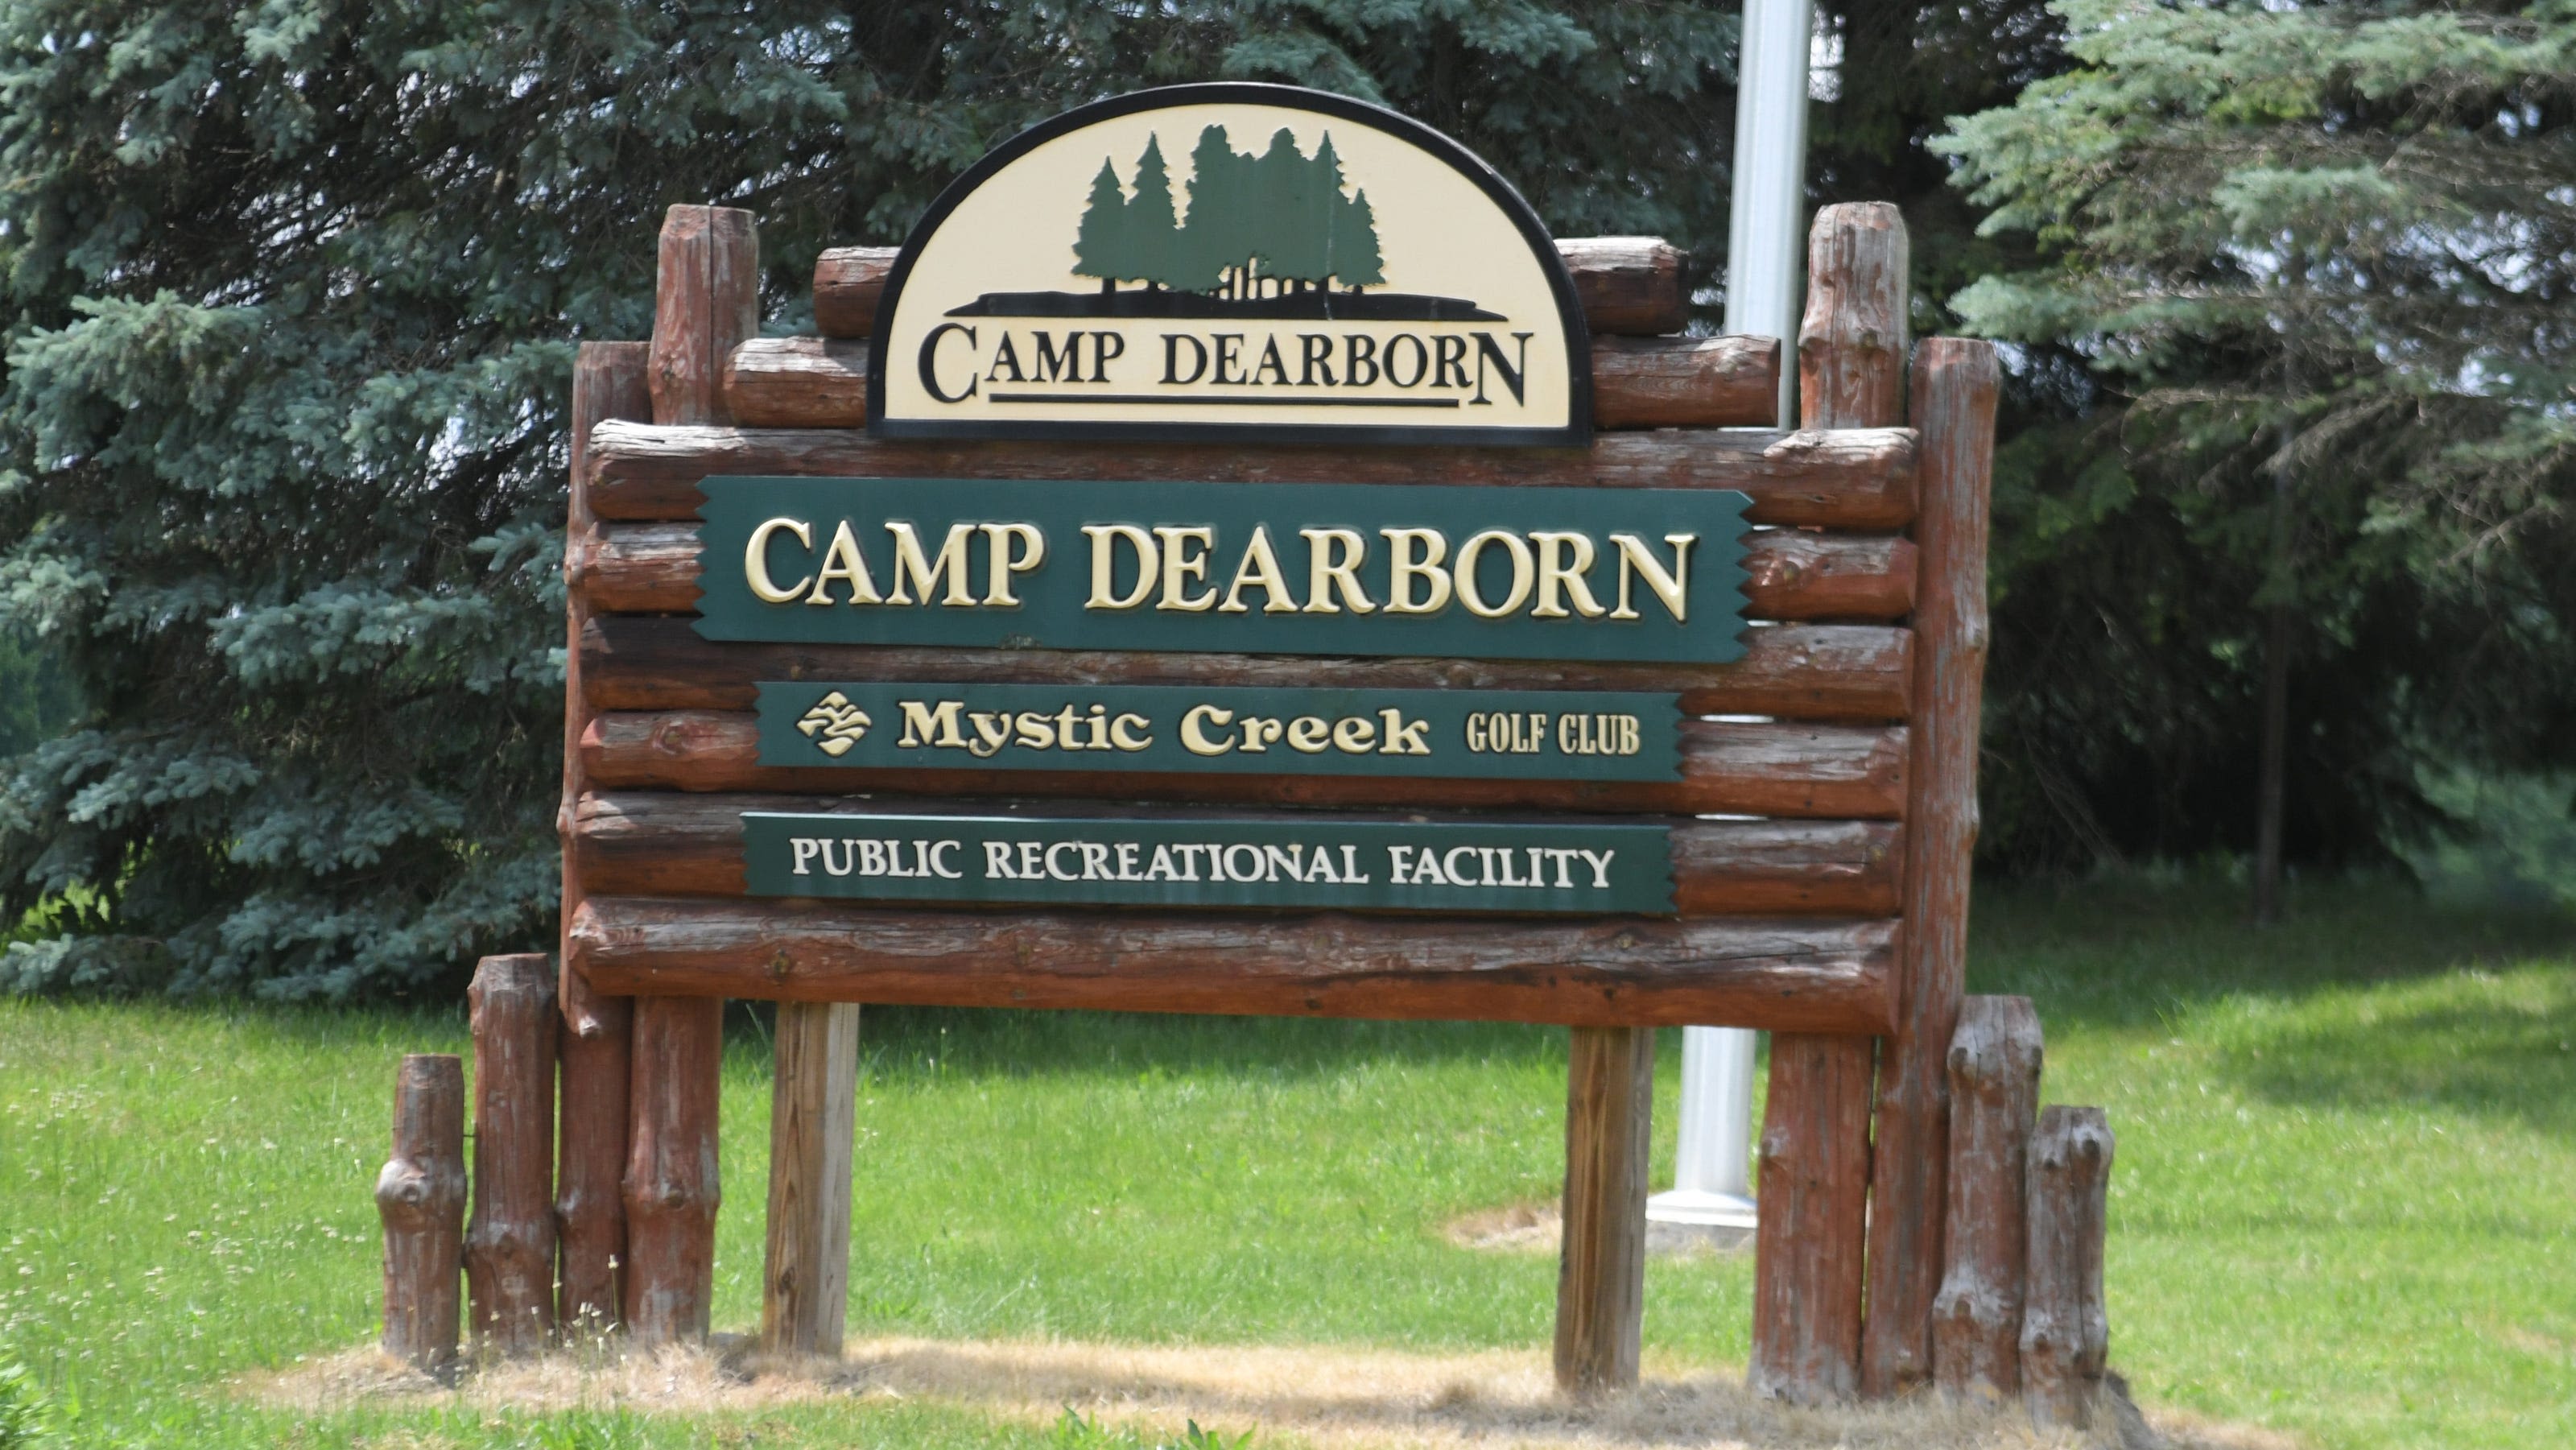 Hamtramck teen's body recovered in drowning at Camp Dearborn